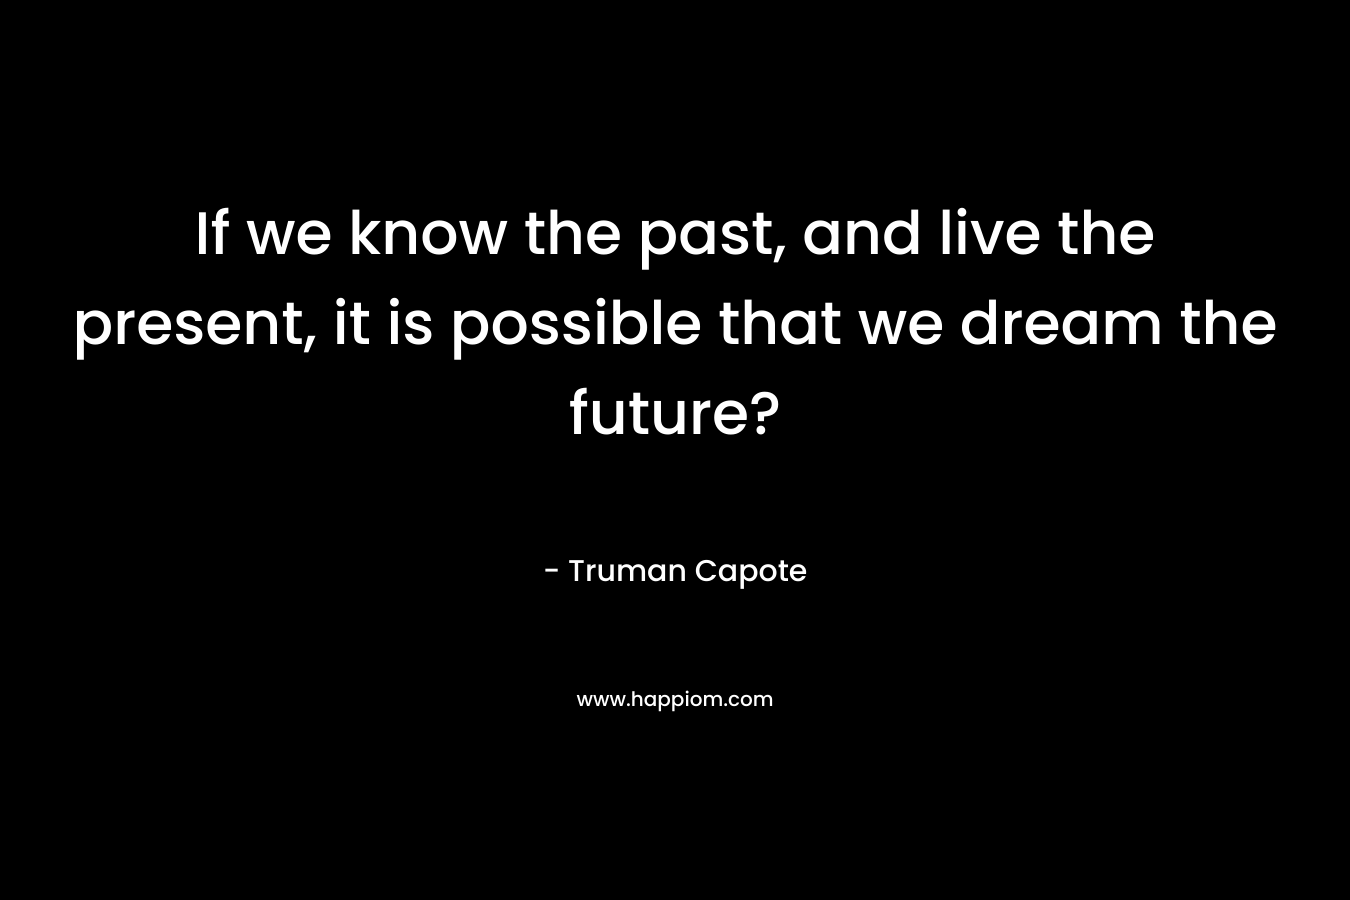 If we know the past, and live the present, it is possible that we dream the future? – Truman Capote